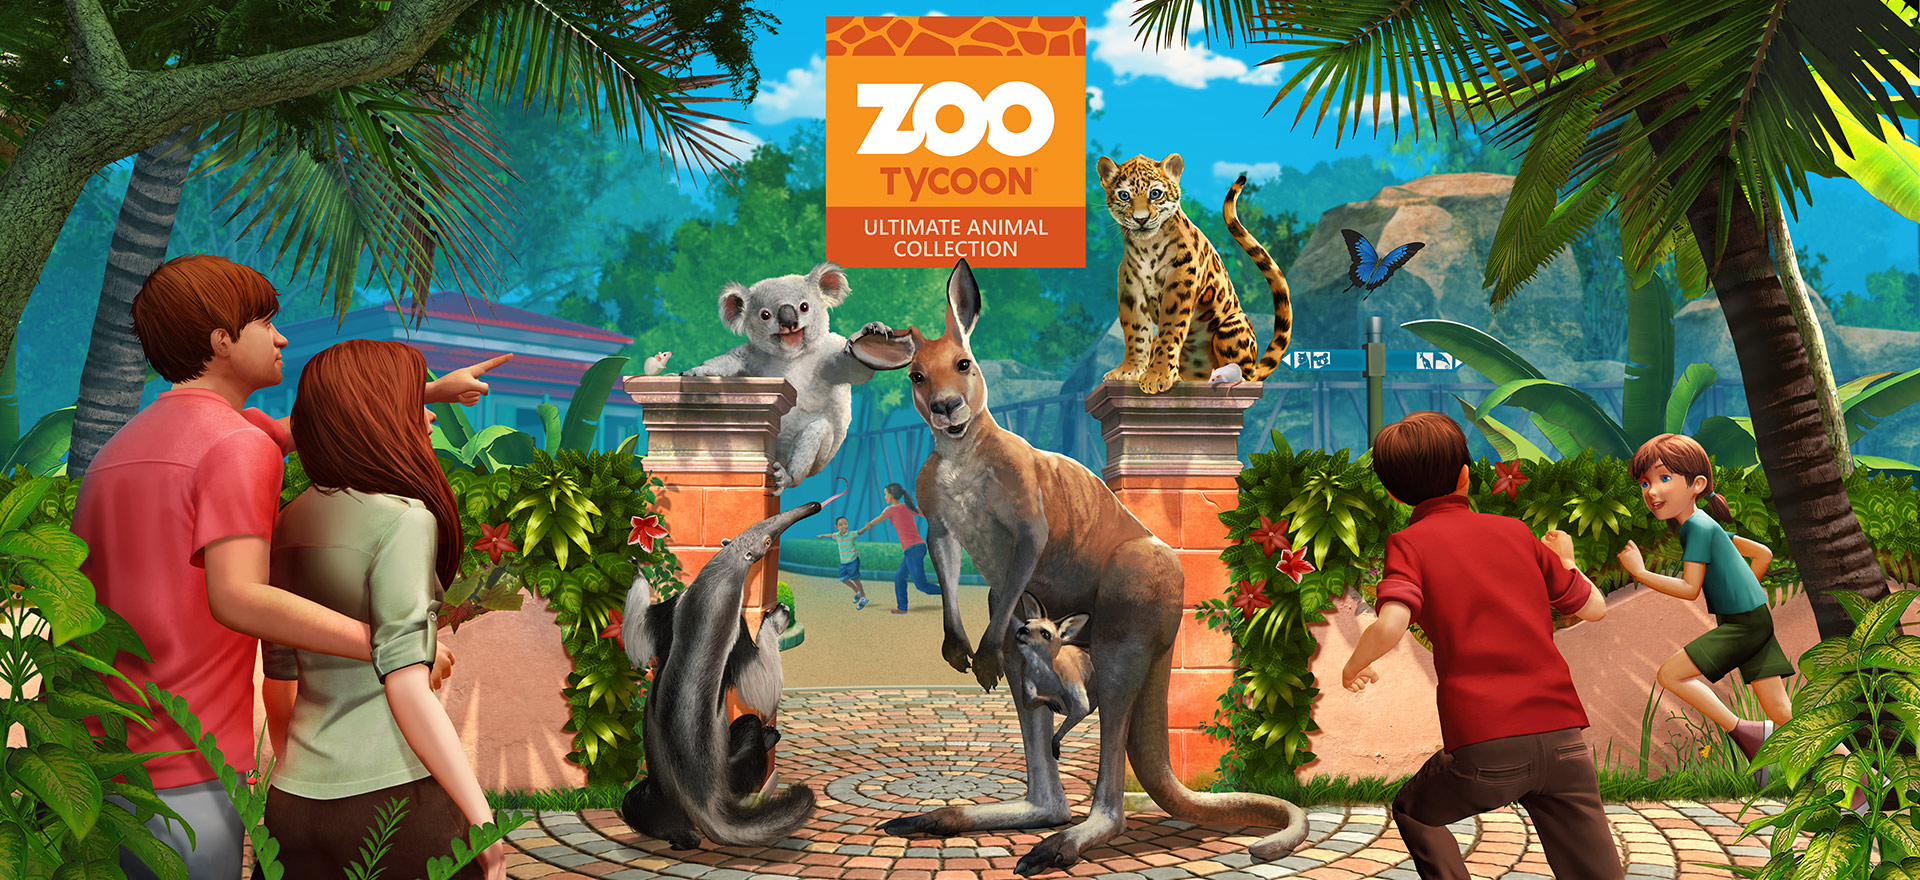 Zoo Tycoon: Ultimate Animal Collection for Xbox One and Windows 10 PC